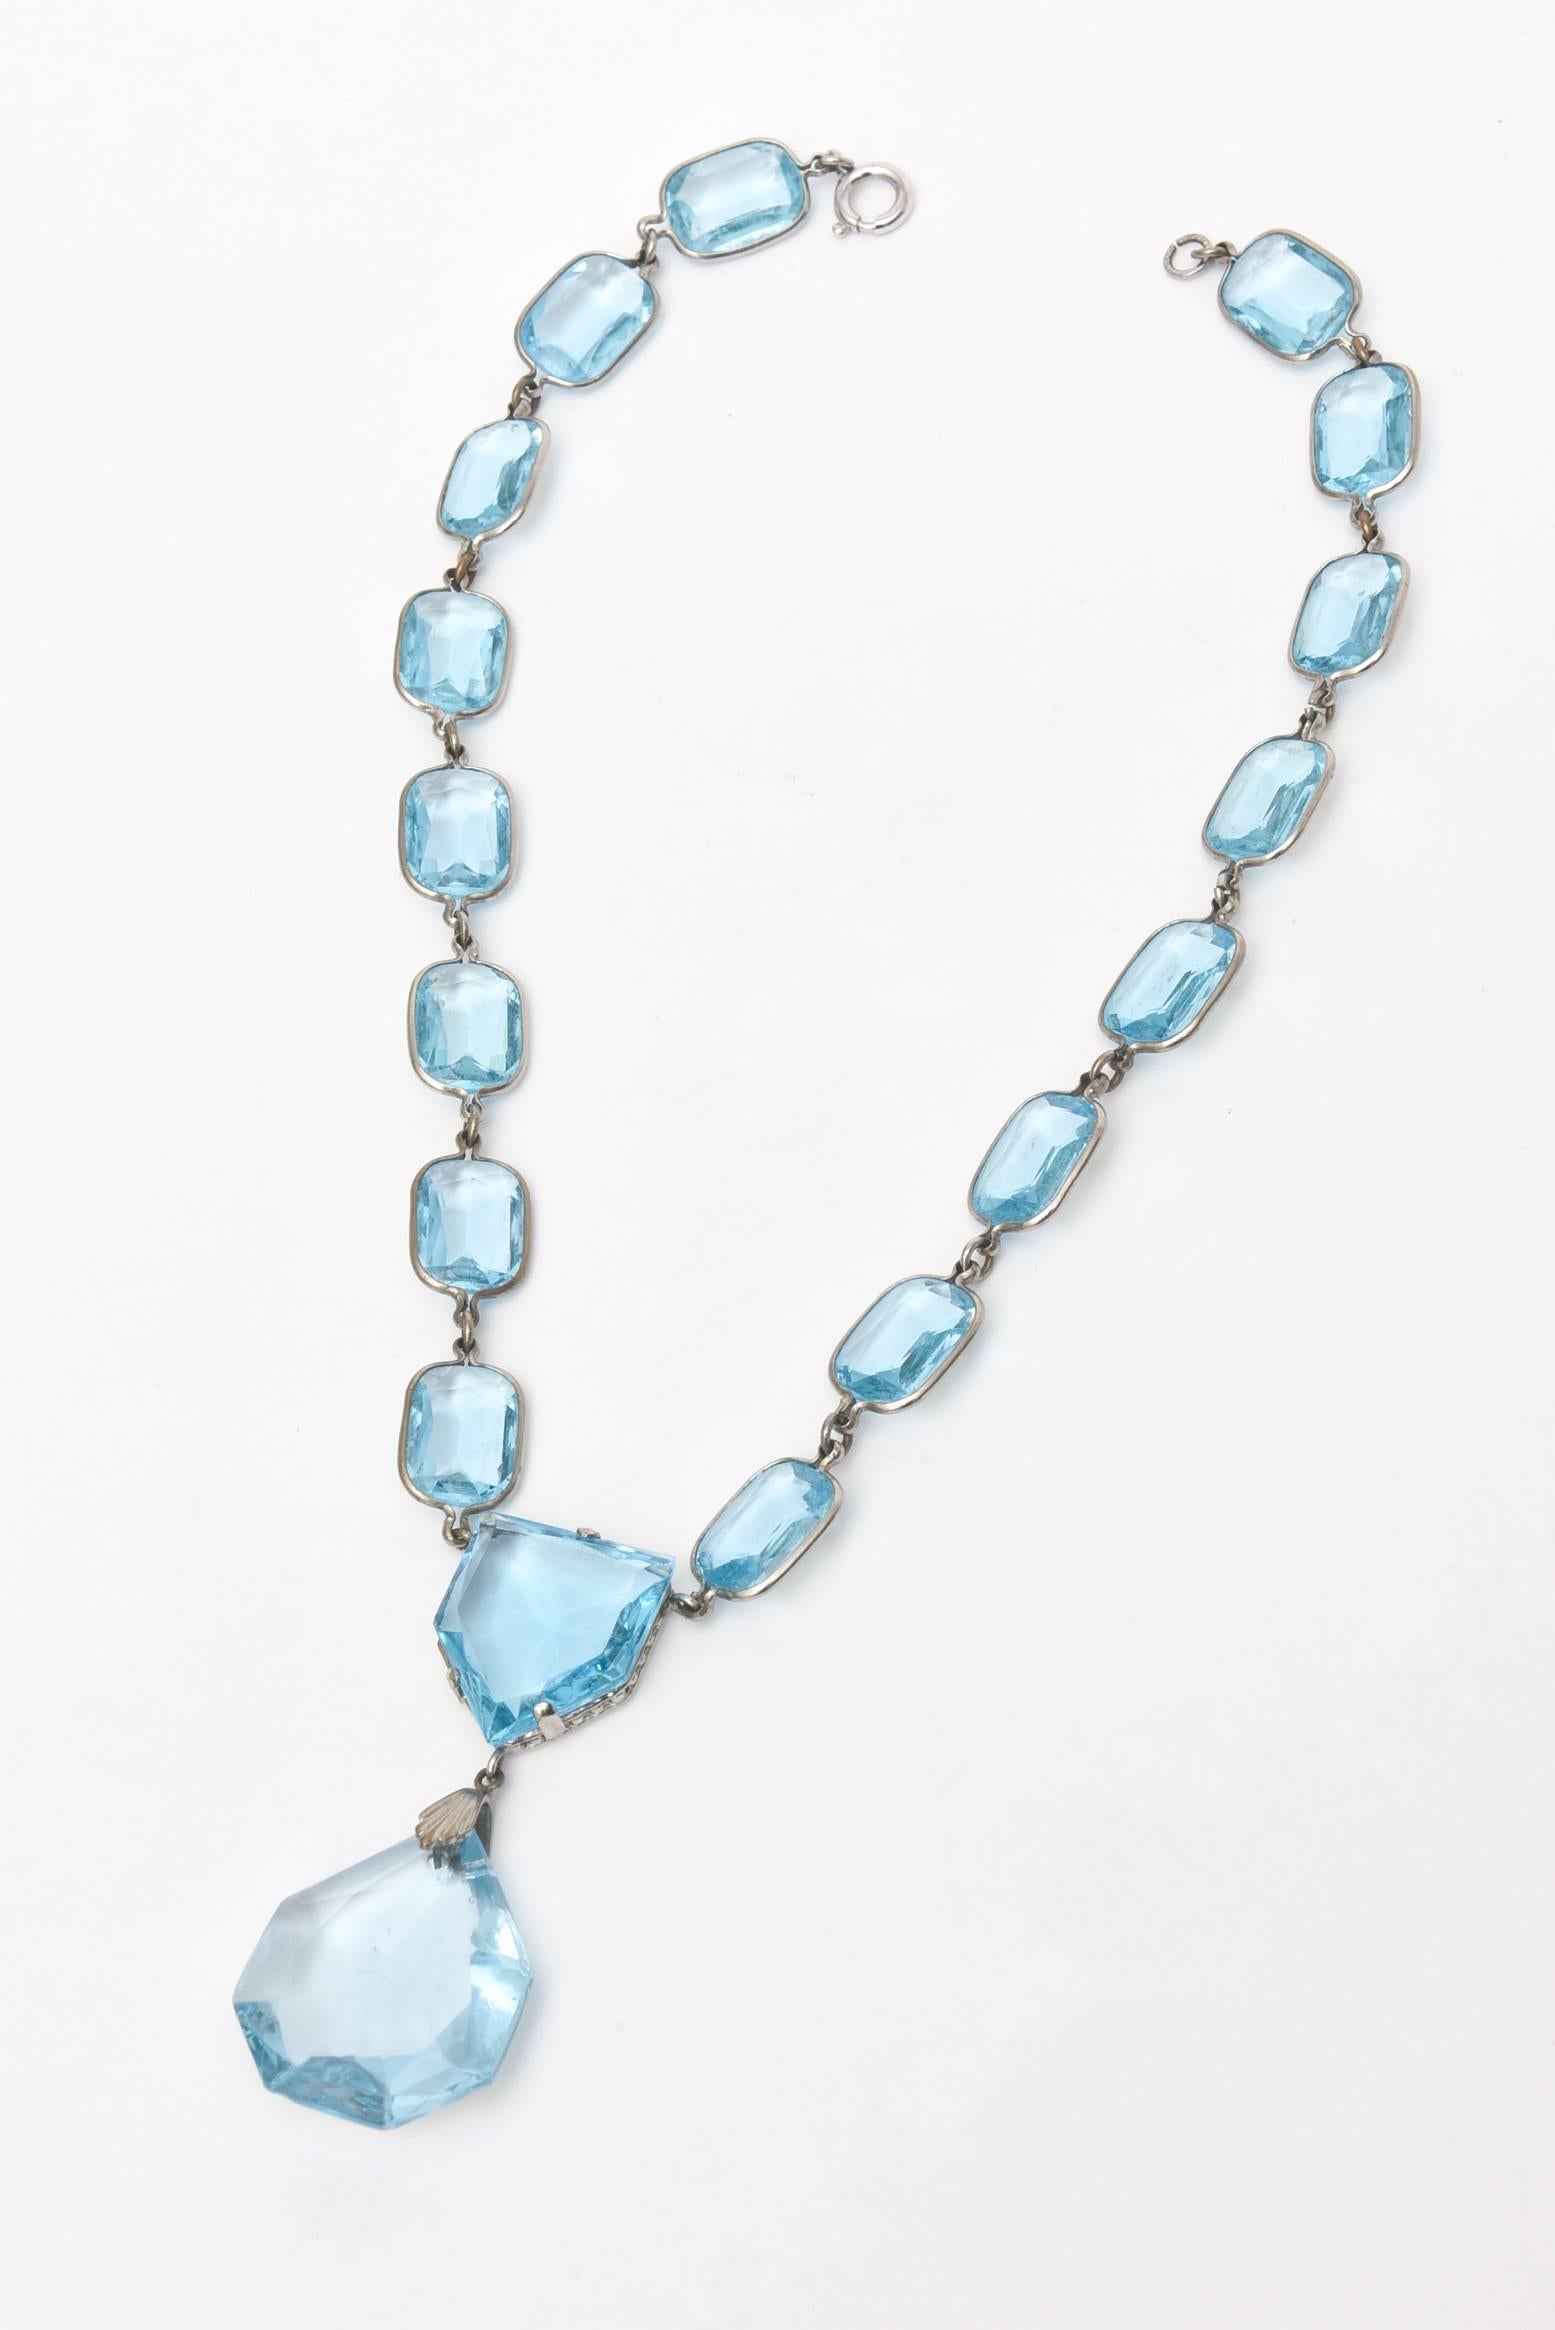 This beautiful necklace with it's ethereal luscious colored faceted glass crystals are connected with sterling silver.
It lays beautifully on the chest/neck.
The color is spectacular. Looks great on bare skin or on clothing.

Great for resort wear